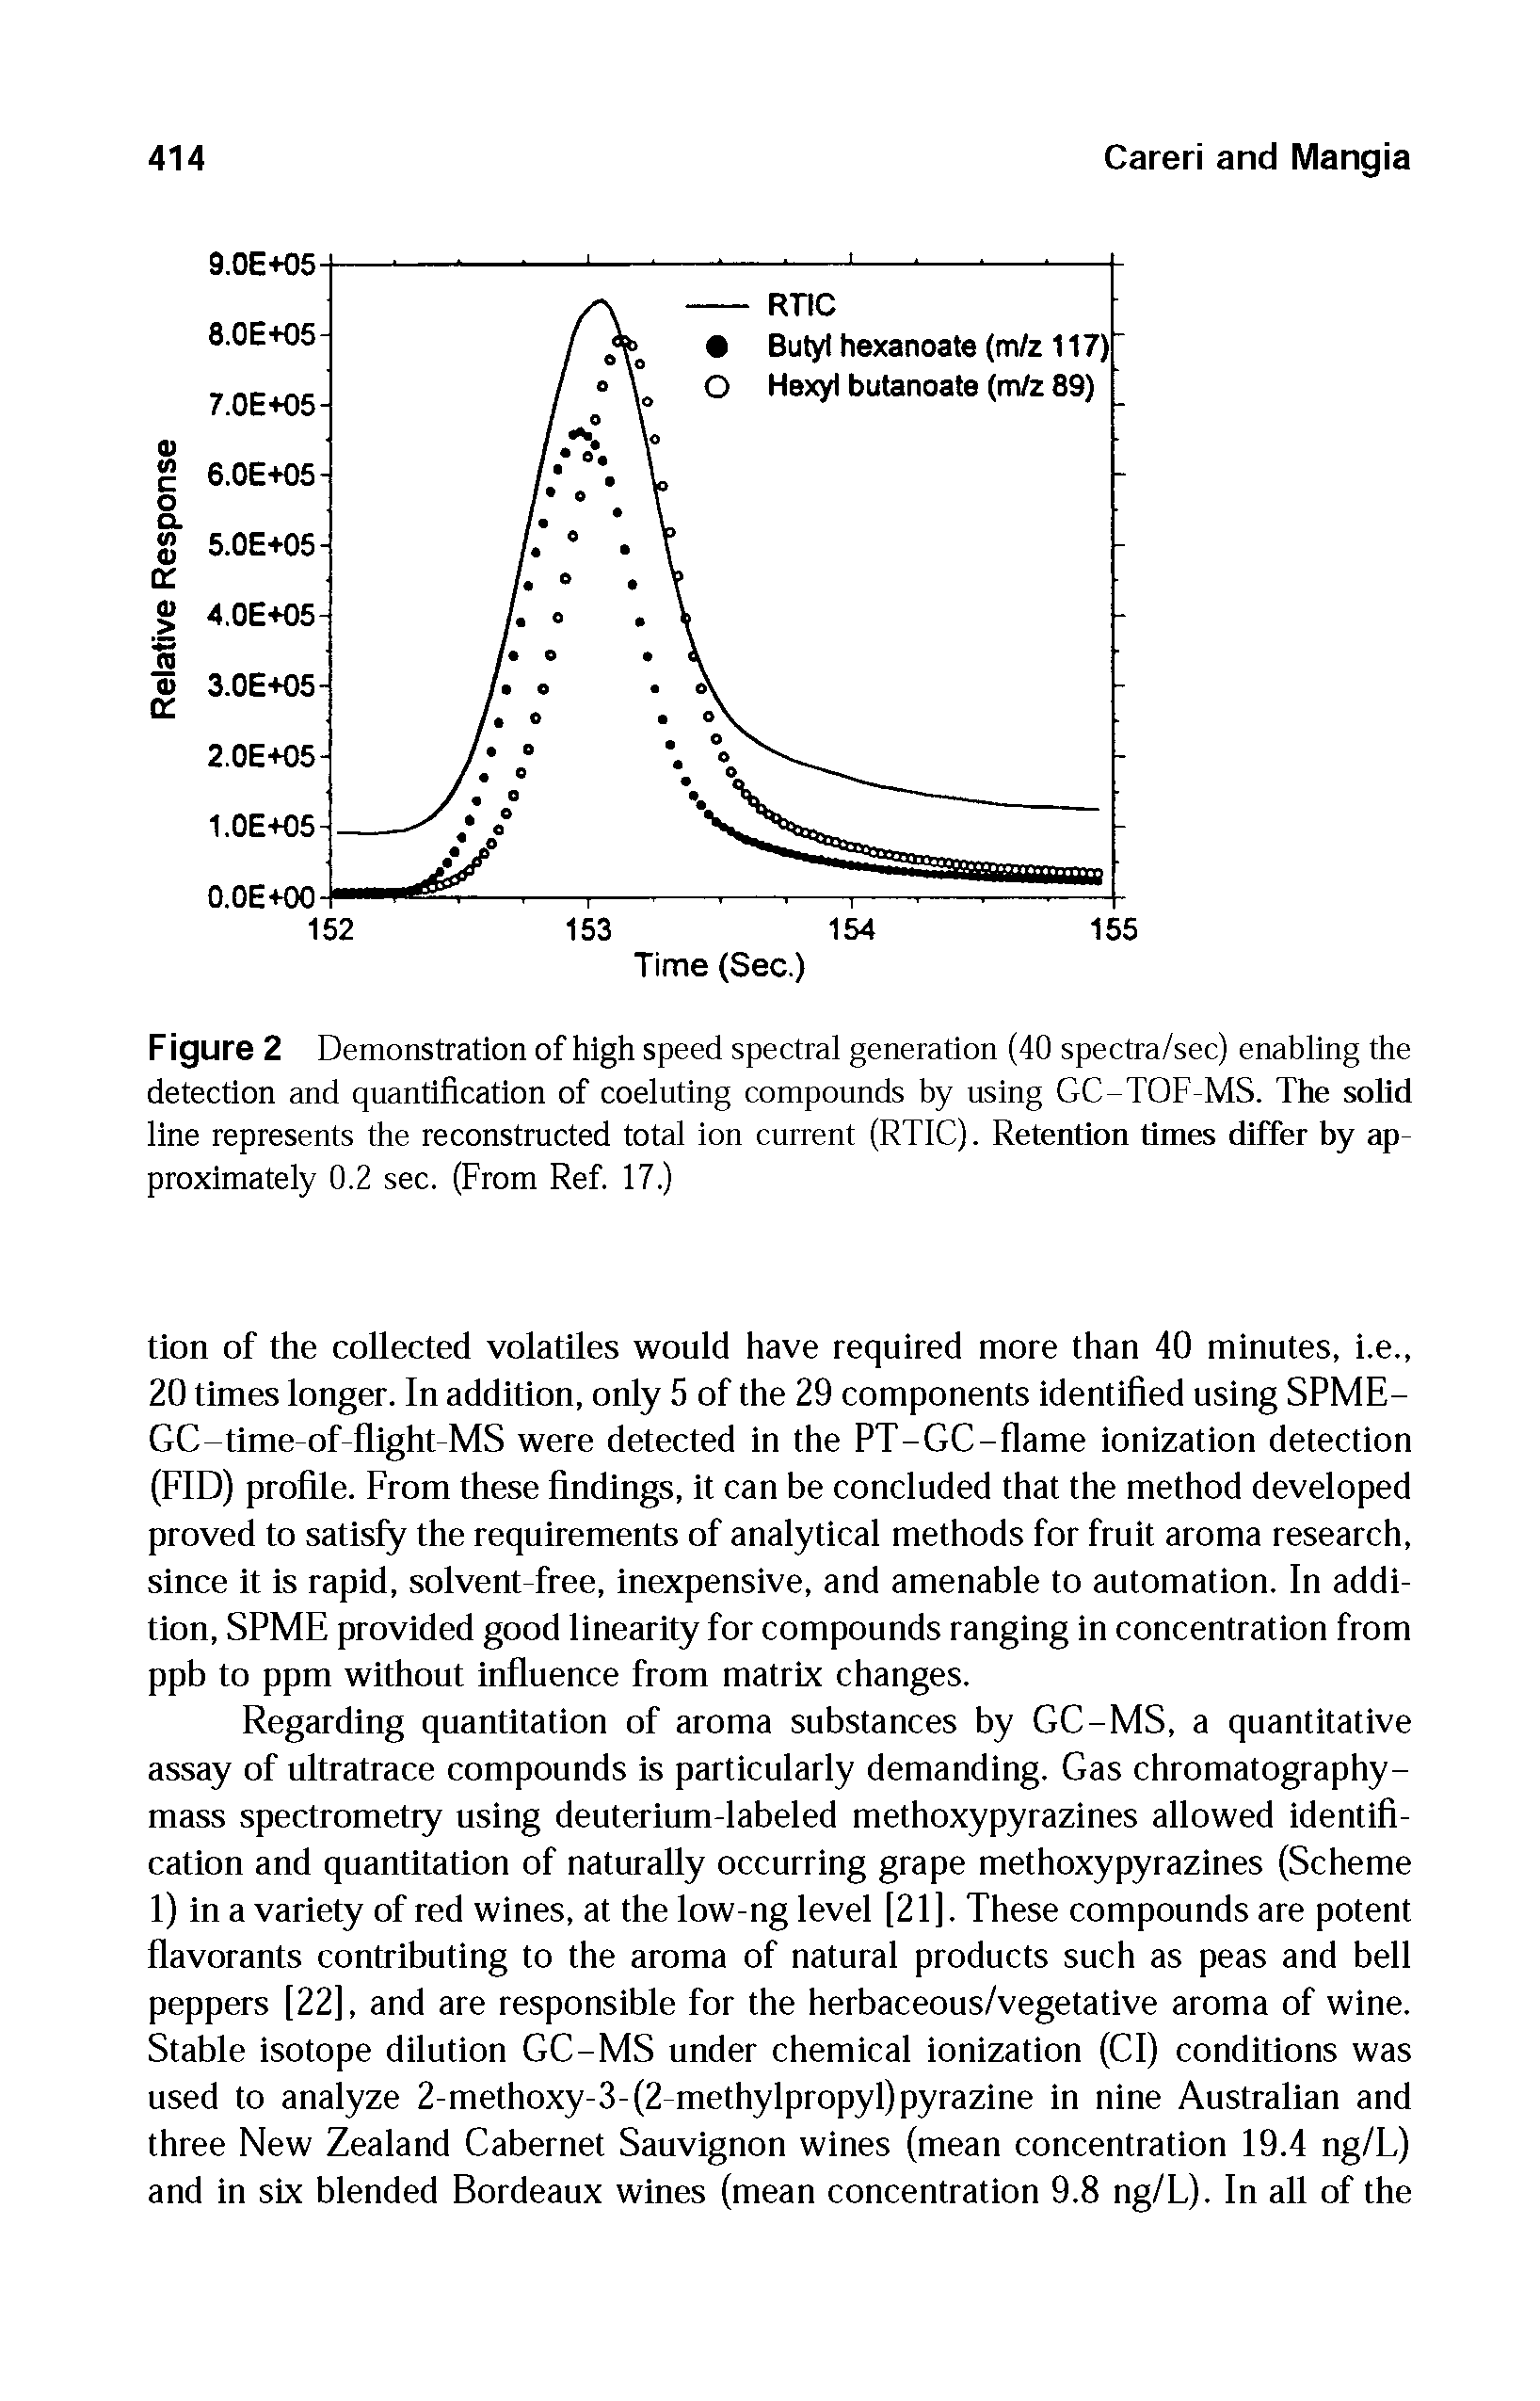 Figure 2 Demonstration of high speed spectral generation (40 spectra/sec) enabling the detection and quantification of coeluting compounds by using GC-TOF-MS. The solid line represents the reconstructed total ion current (RTIC). Retention times differ by approximately 0.2 sec. (From Ref. 17.)...